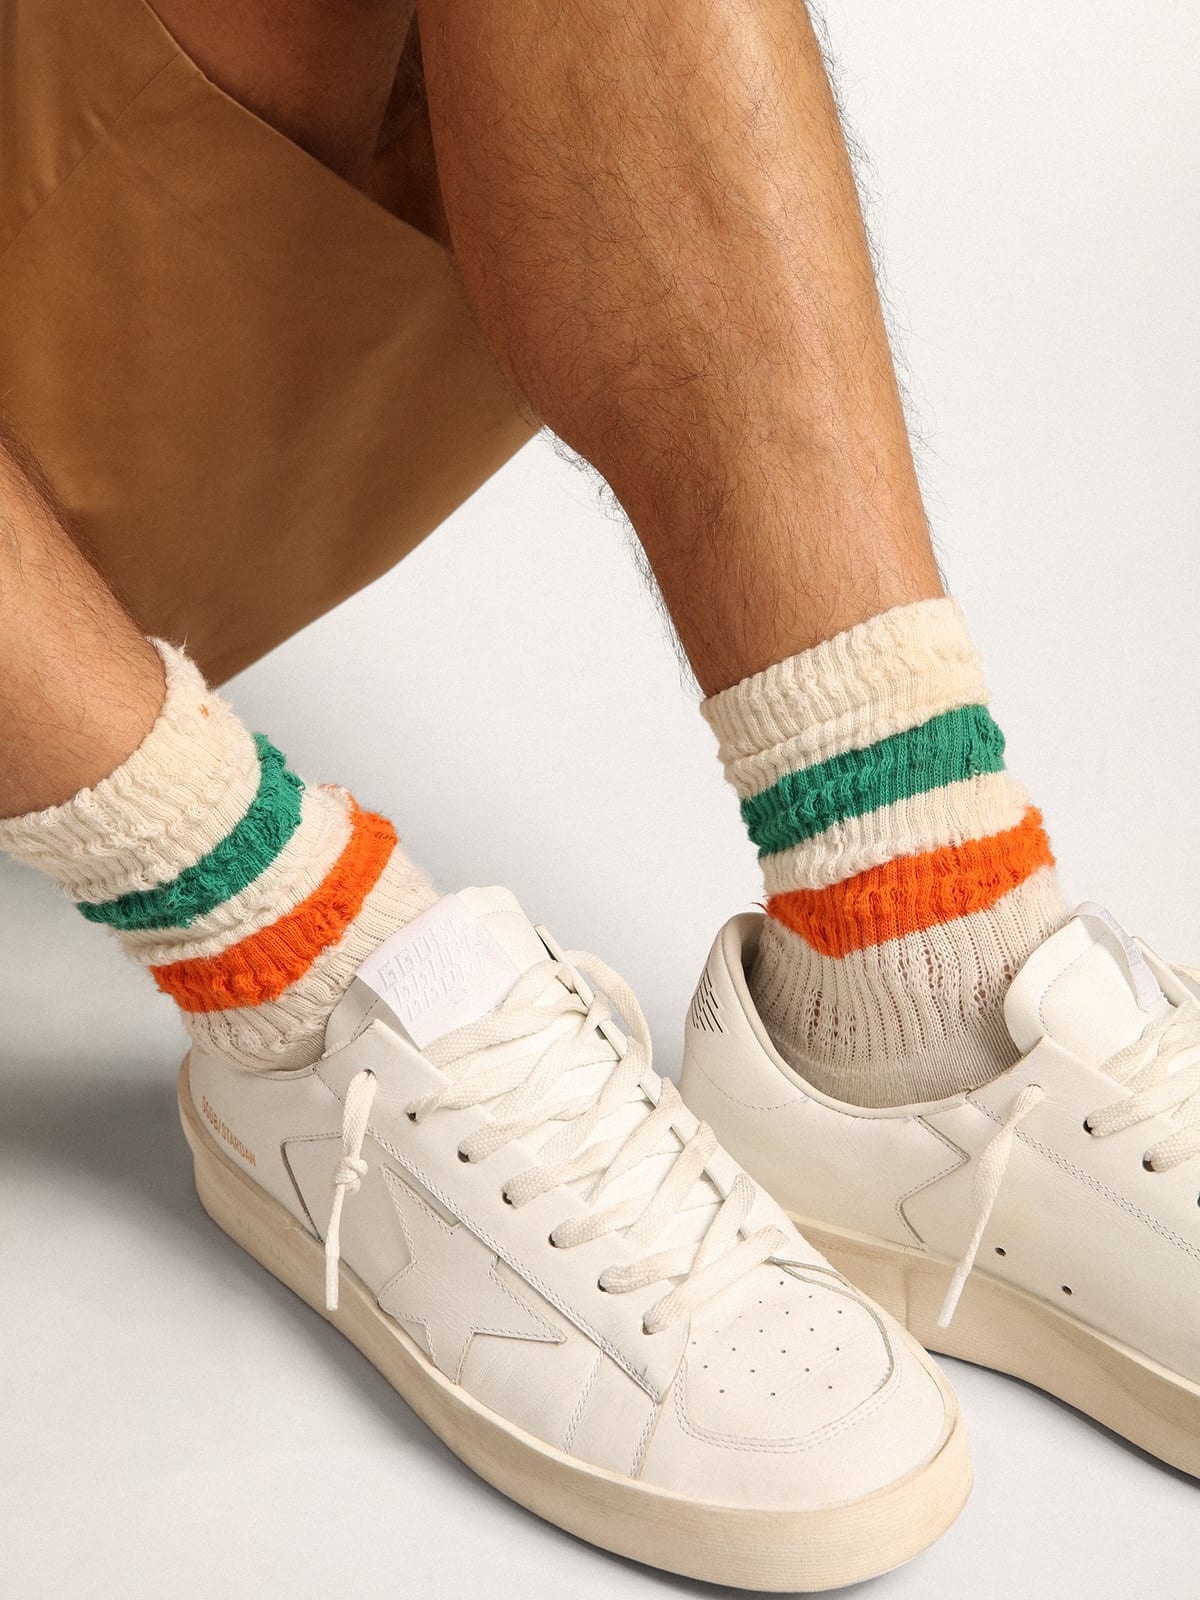 Distressed-finish white socks with green and orange stripes - 4